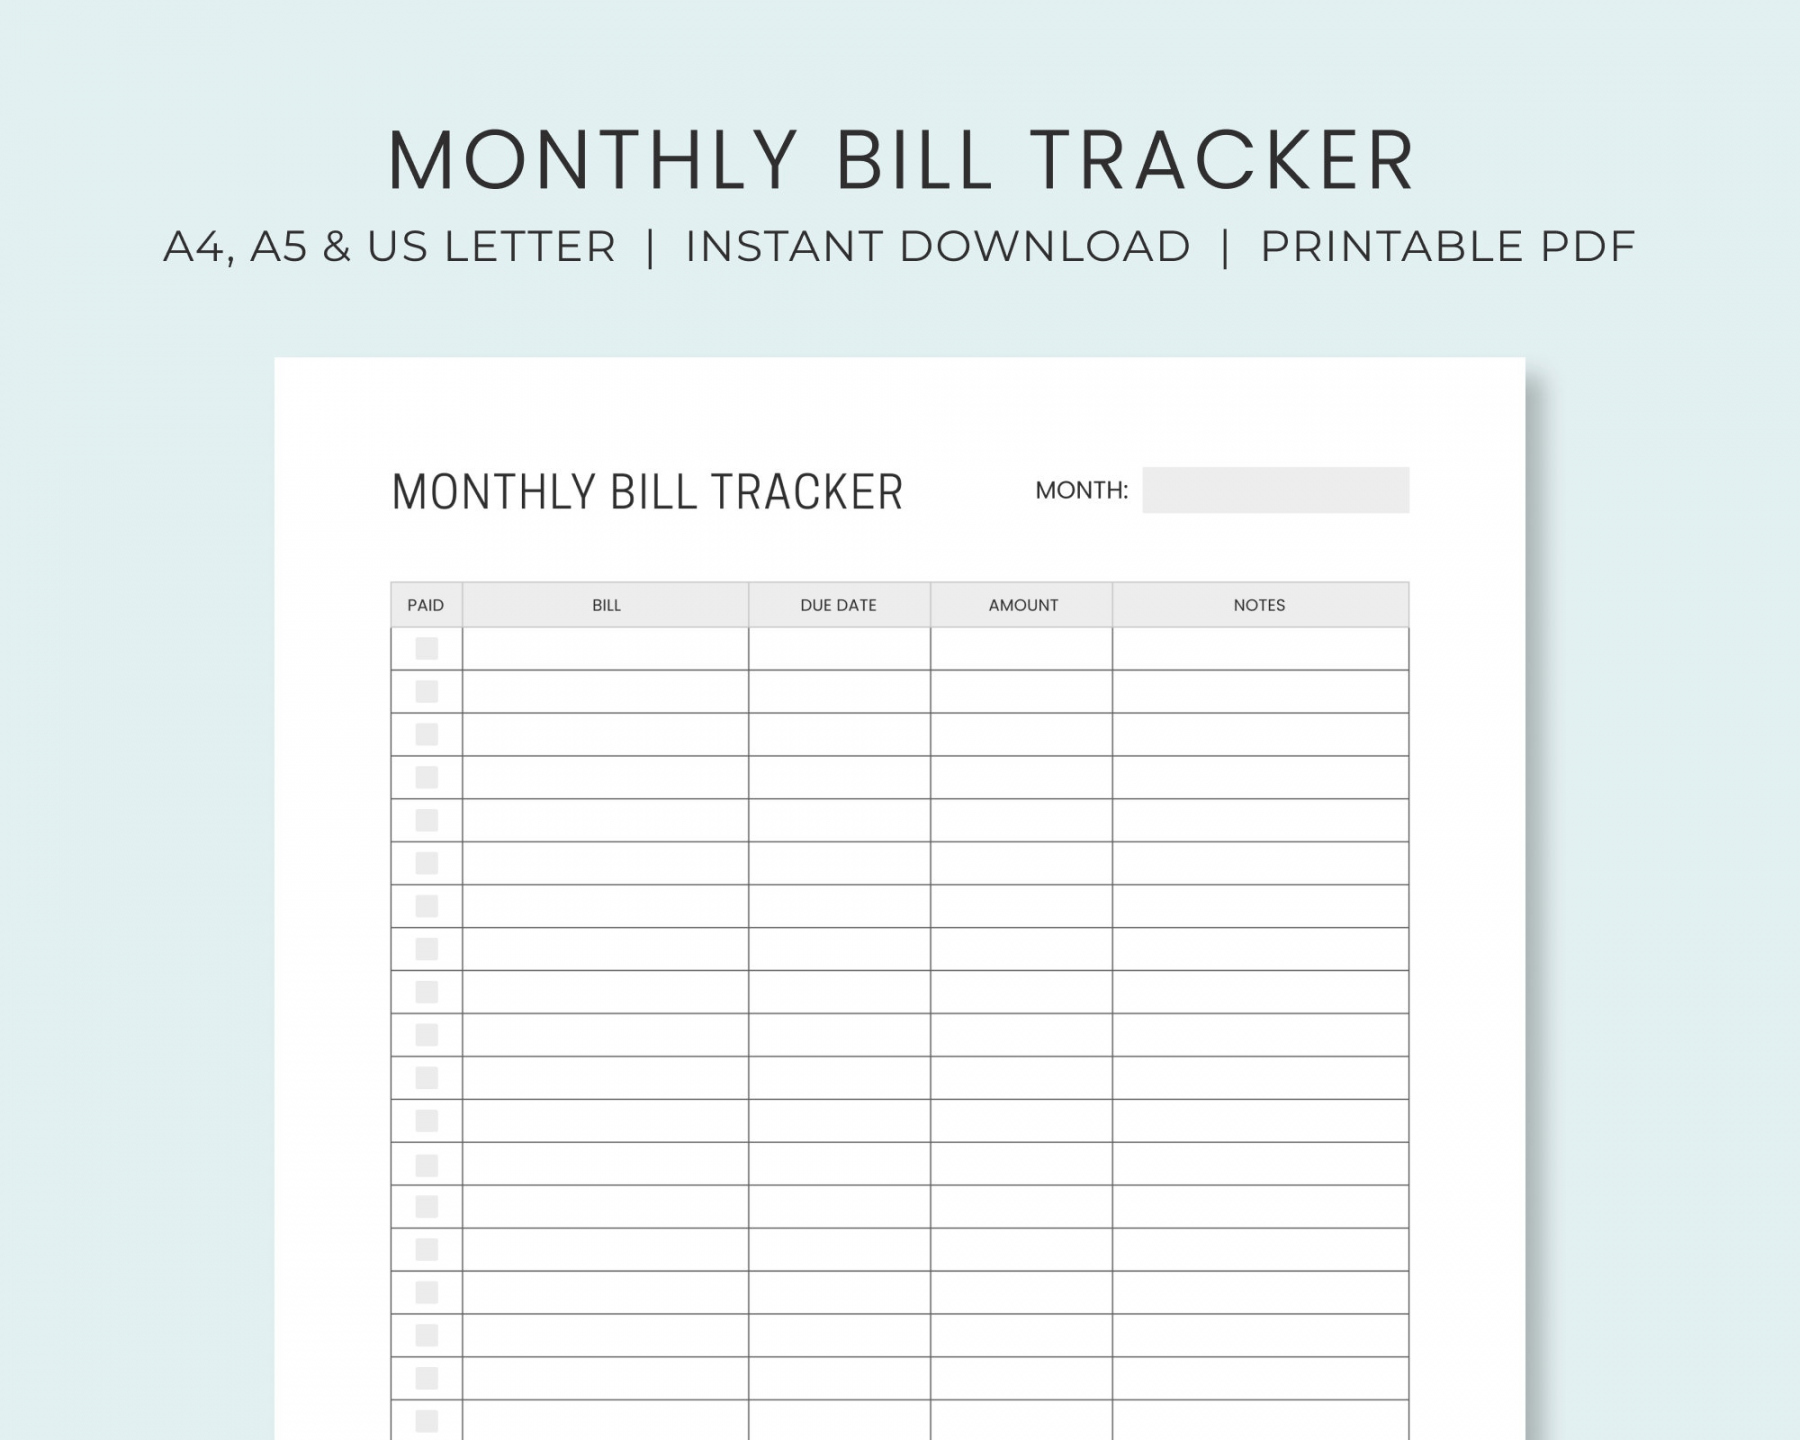 Free Printable Monthly Bill Payment Log - Printable - Monthly Bill Payment Tracker Printable Bill Pay Checklist - Etsy